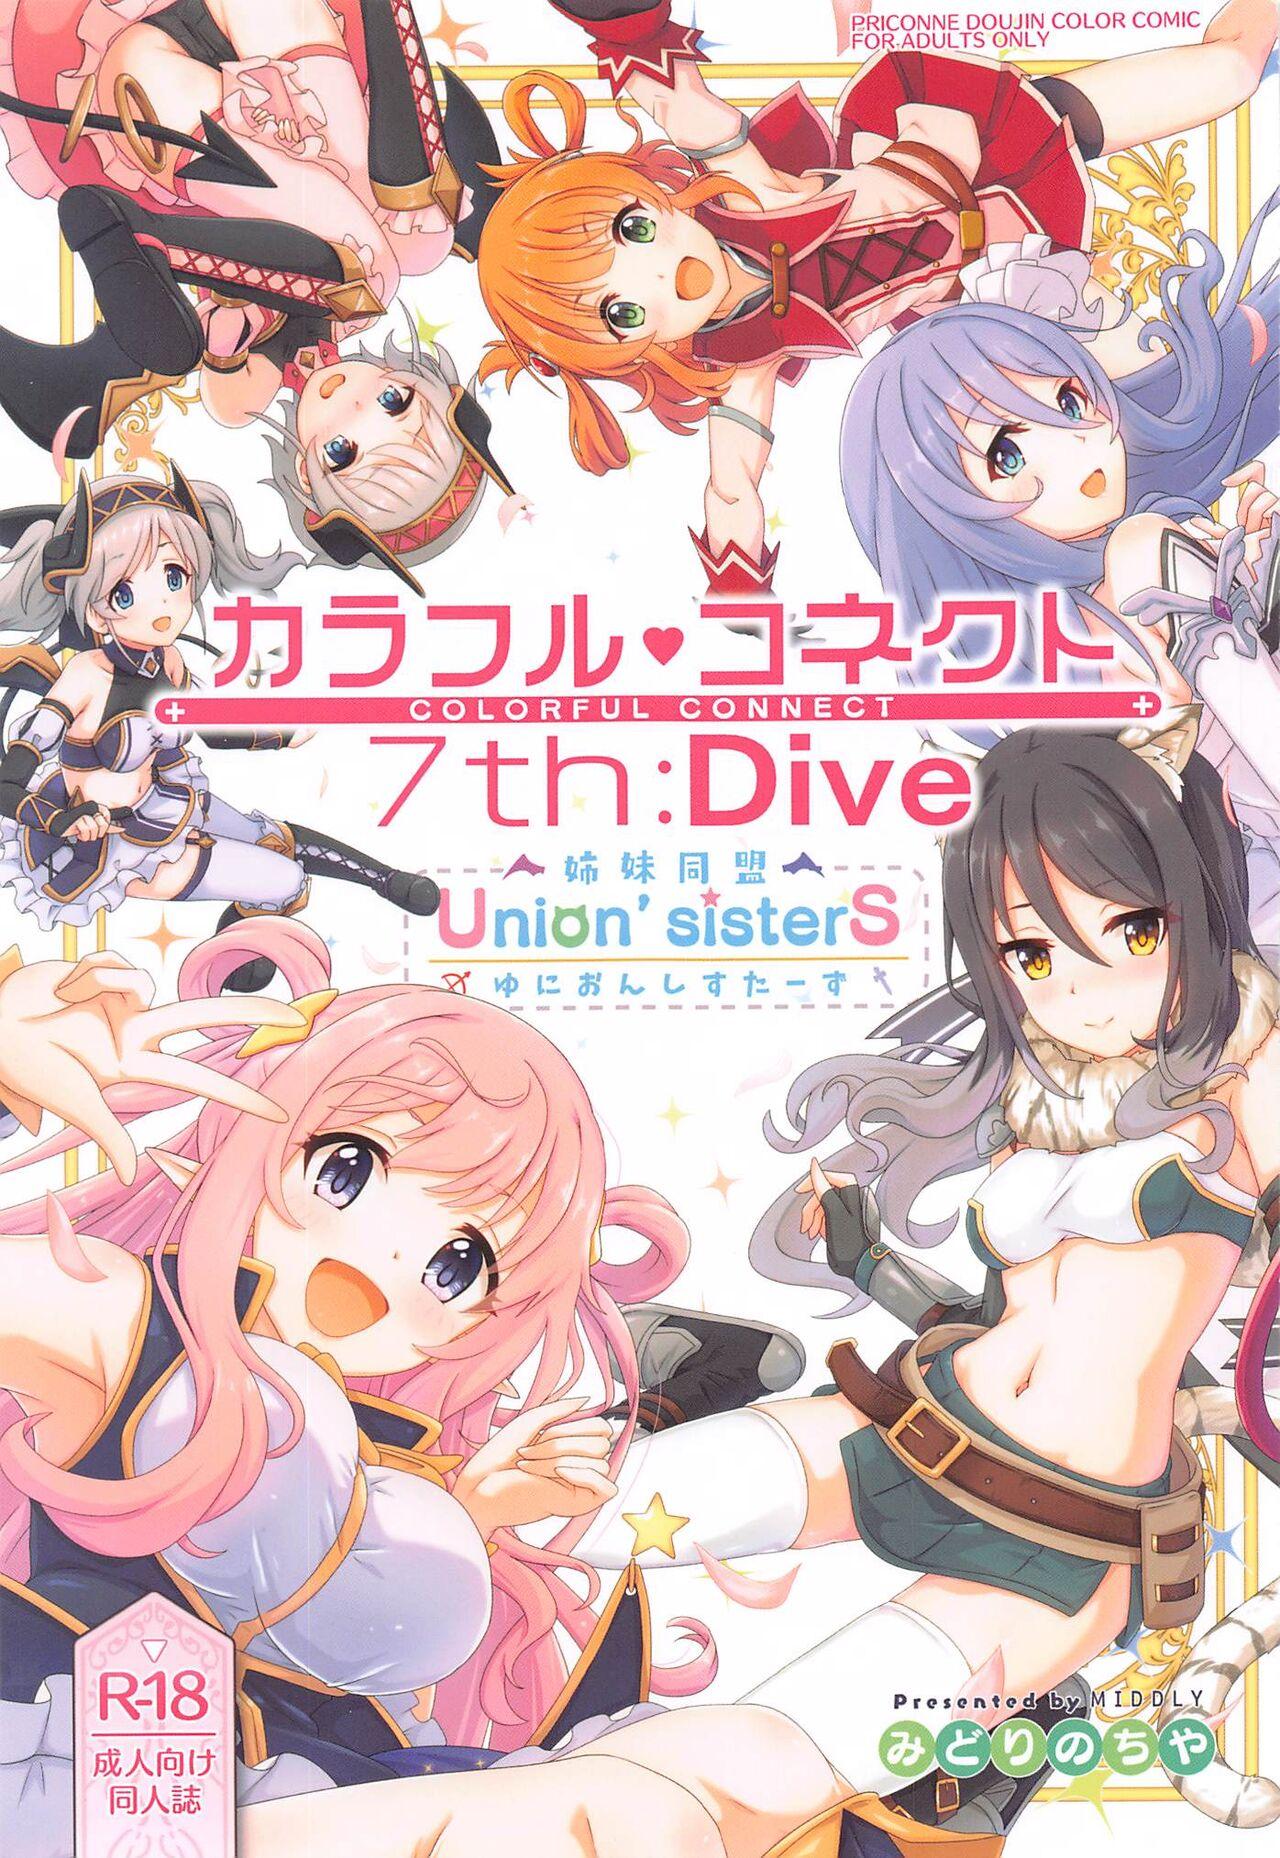 Ffm Colorful Connect 7th:Dive - Union Sisters - Princess connect Italiana - Page 1